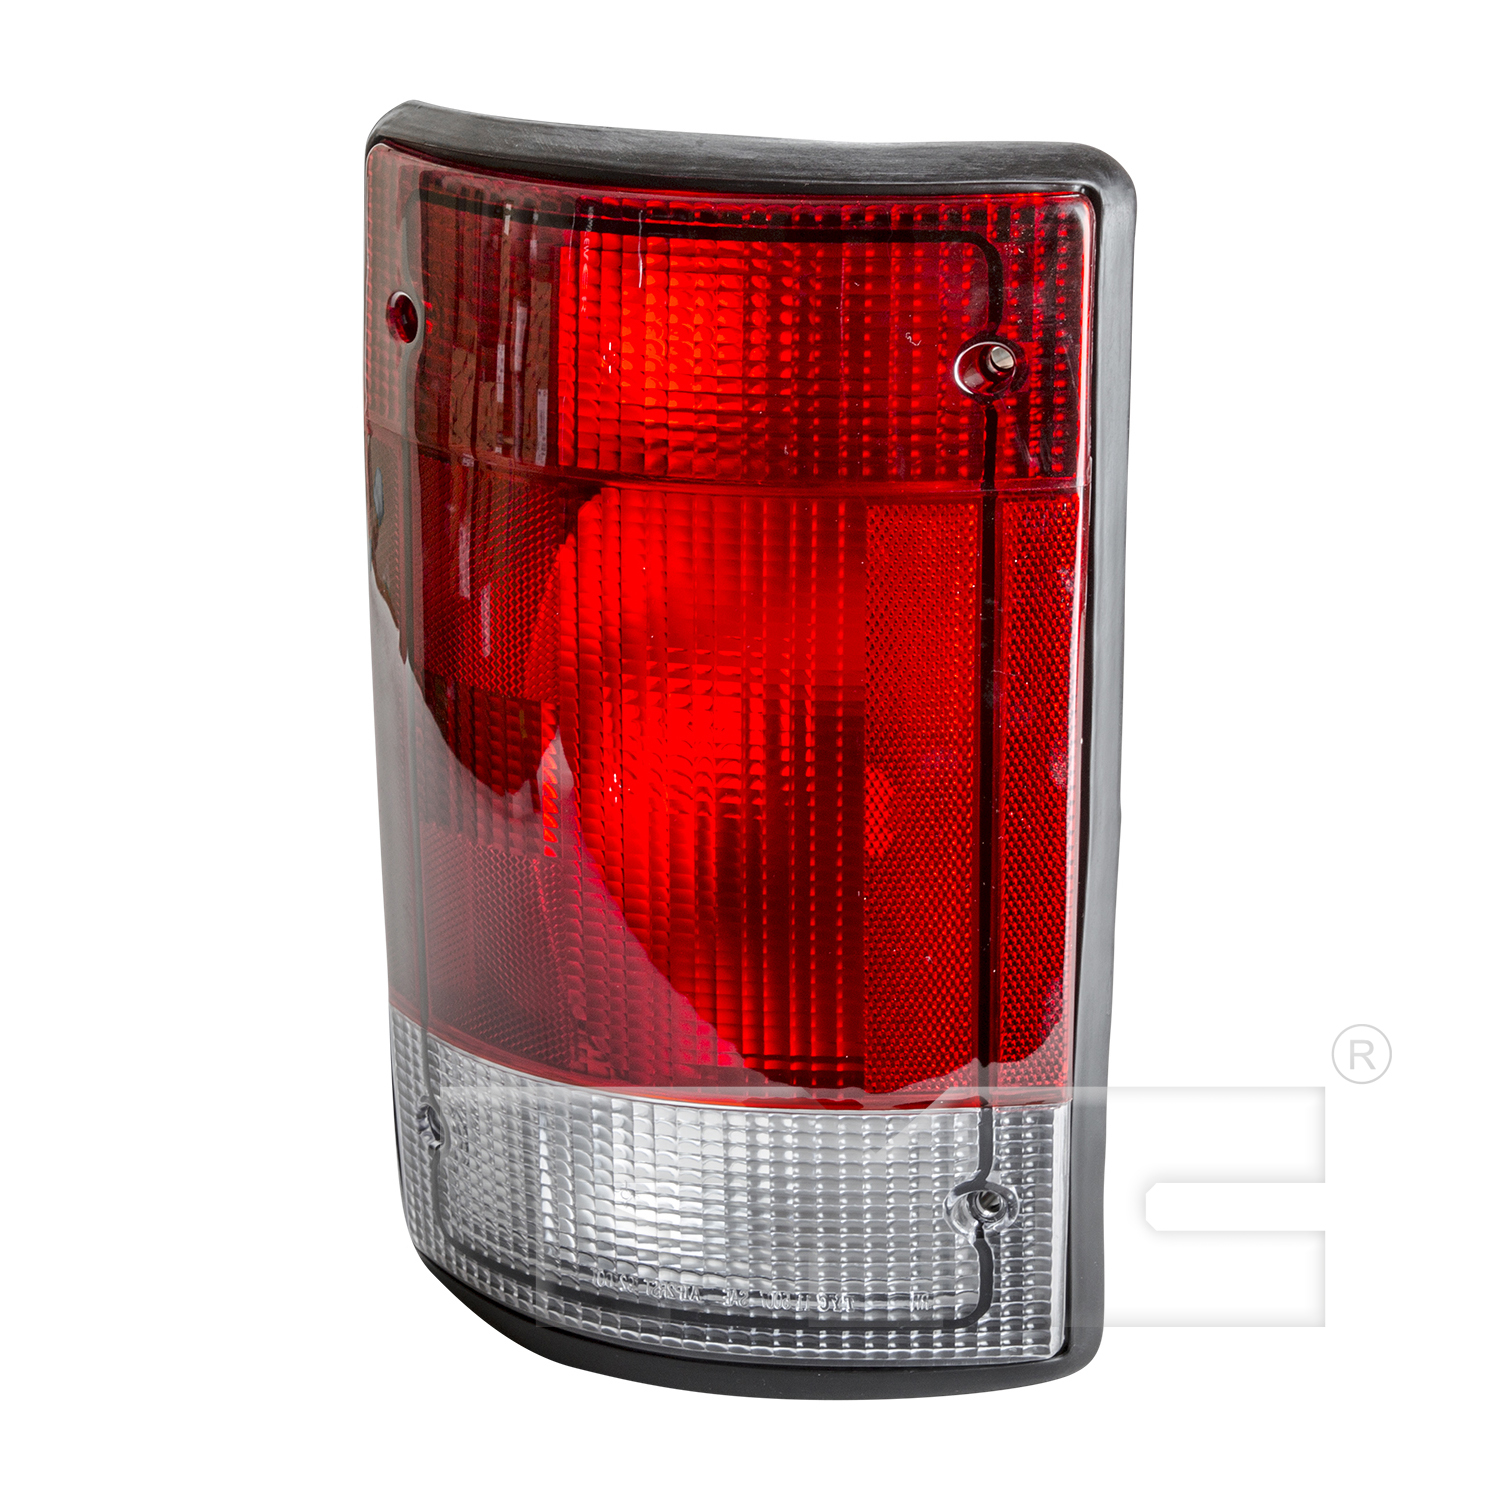 Aftermarket TAILLIGHTS for FORD - E-350 ECONOLINE CLUB WAGON, E-350 ECONOLINE CLUB WAGON,95-02,LT Taillamp assy